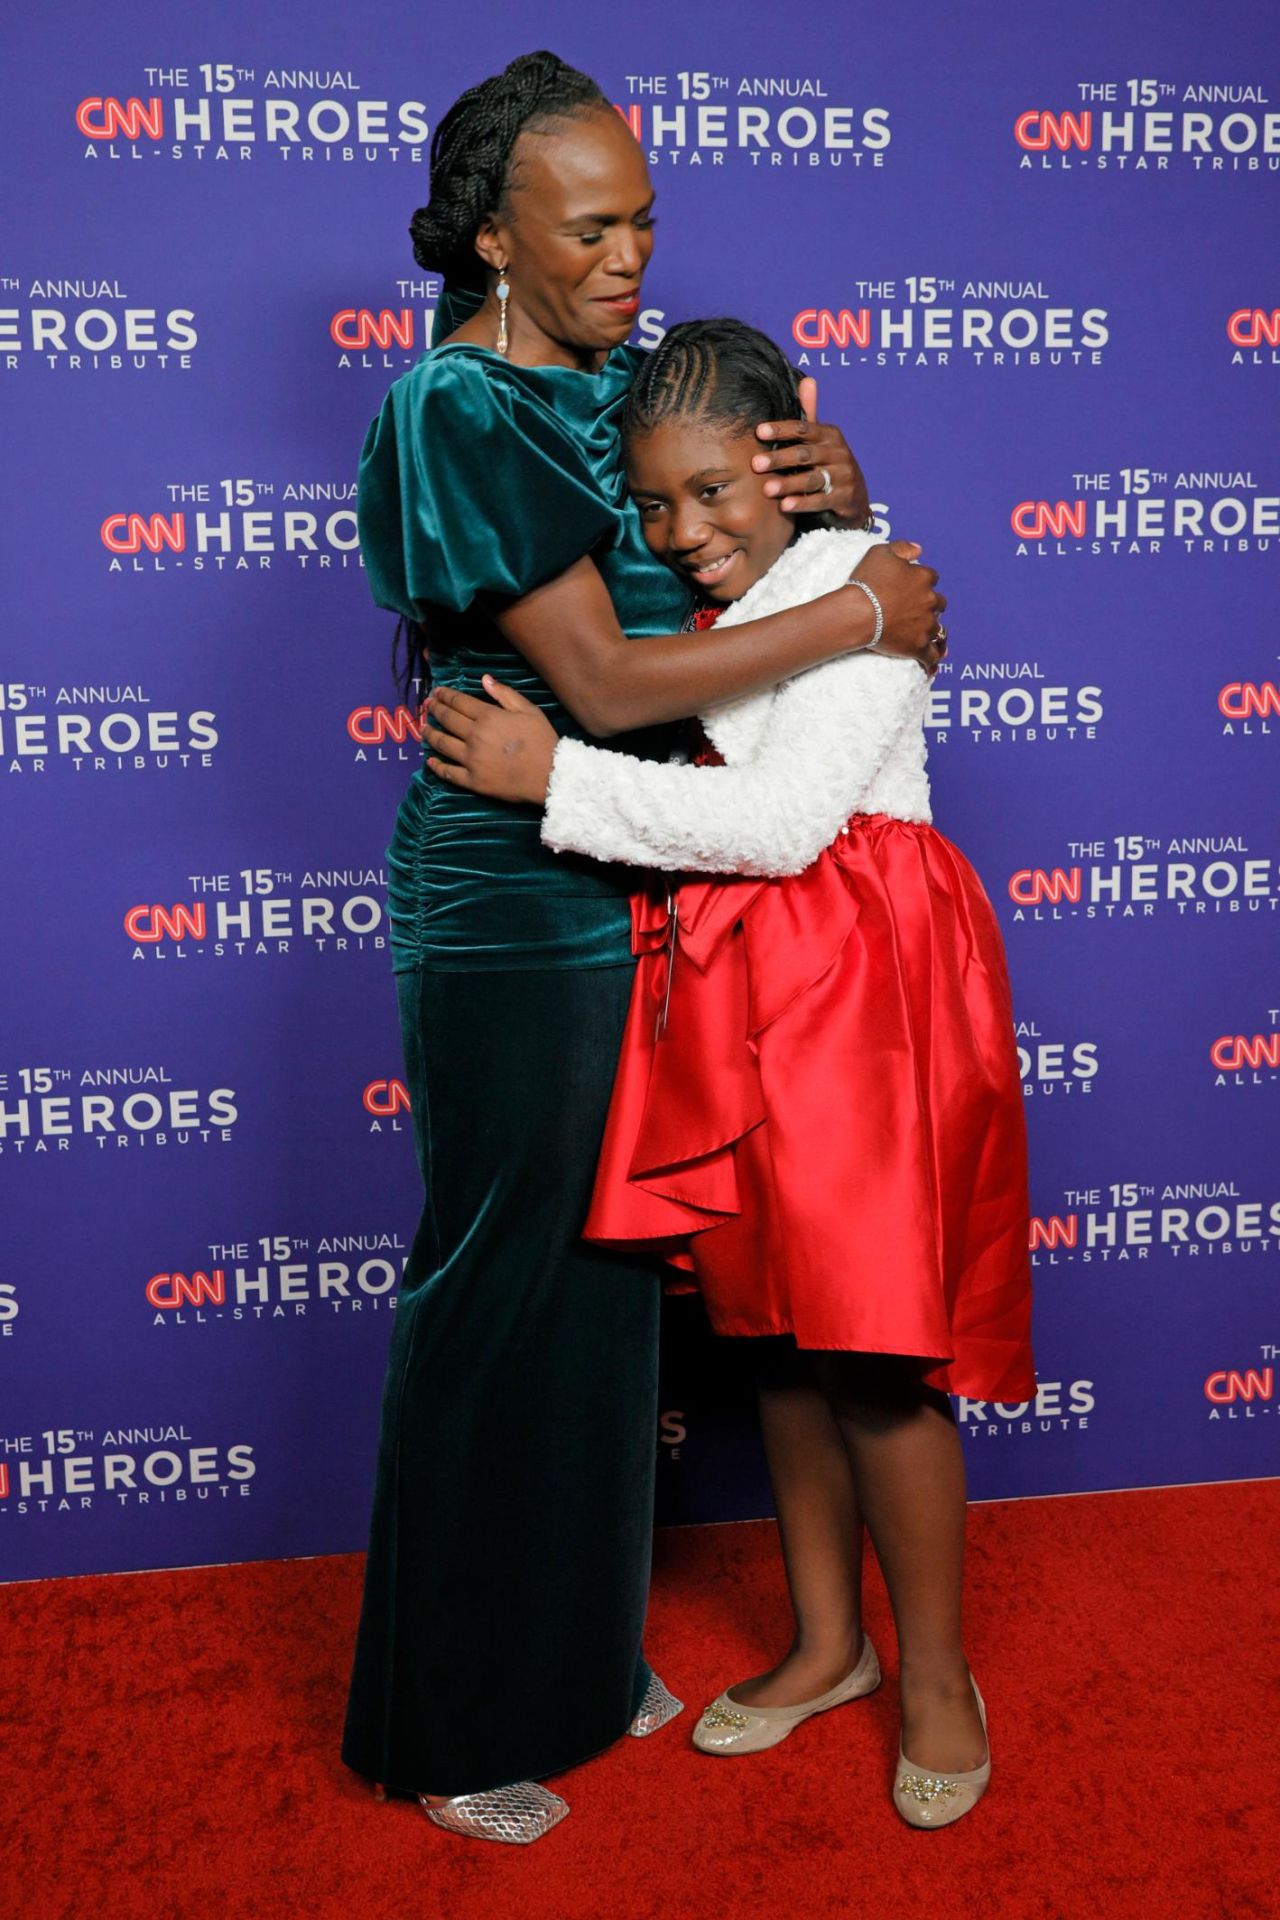 2021 <a href="https://www.cnn.com/2021/06/24/health/philadelphia-black-doctors-covid-19-vaccination-cnnheroes/index.html" target="_blank">CNN Hero Dr. Ala Stanford</a> embraces 2021 Young Wonder Chelsea Phaire.